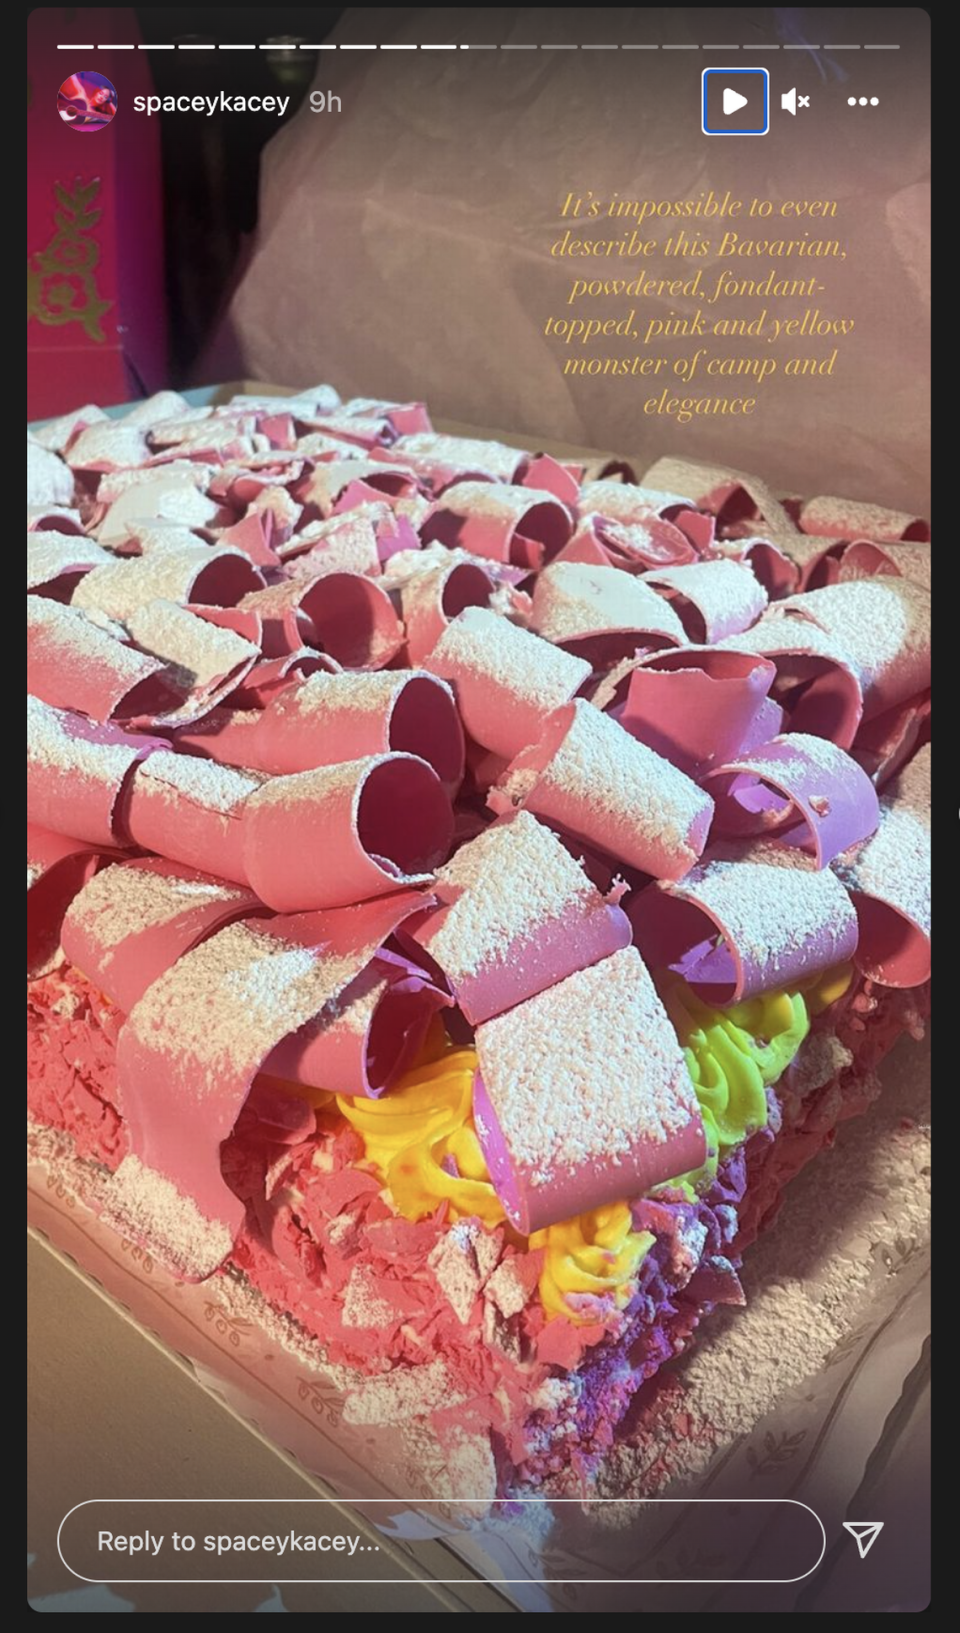 On her Instagram story, Kacey Musgraves showed off the two pink champagne cakes she had delivered from the Madonna Inn to her concert at the Crypto.com Arena in Los Angeles on Feb. 20, 2022.